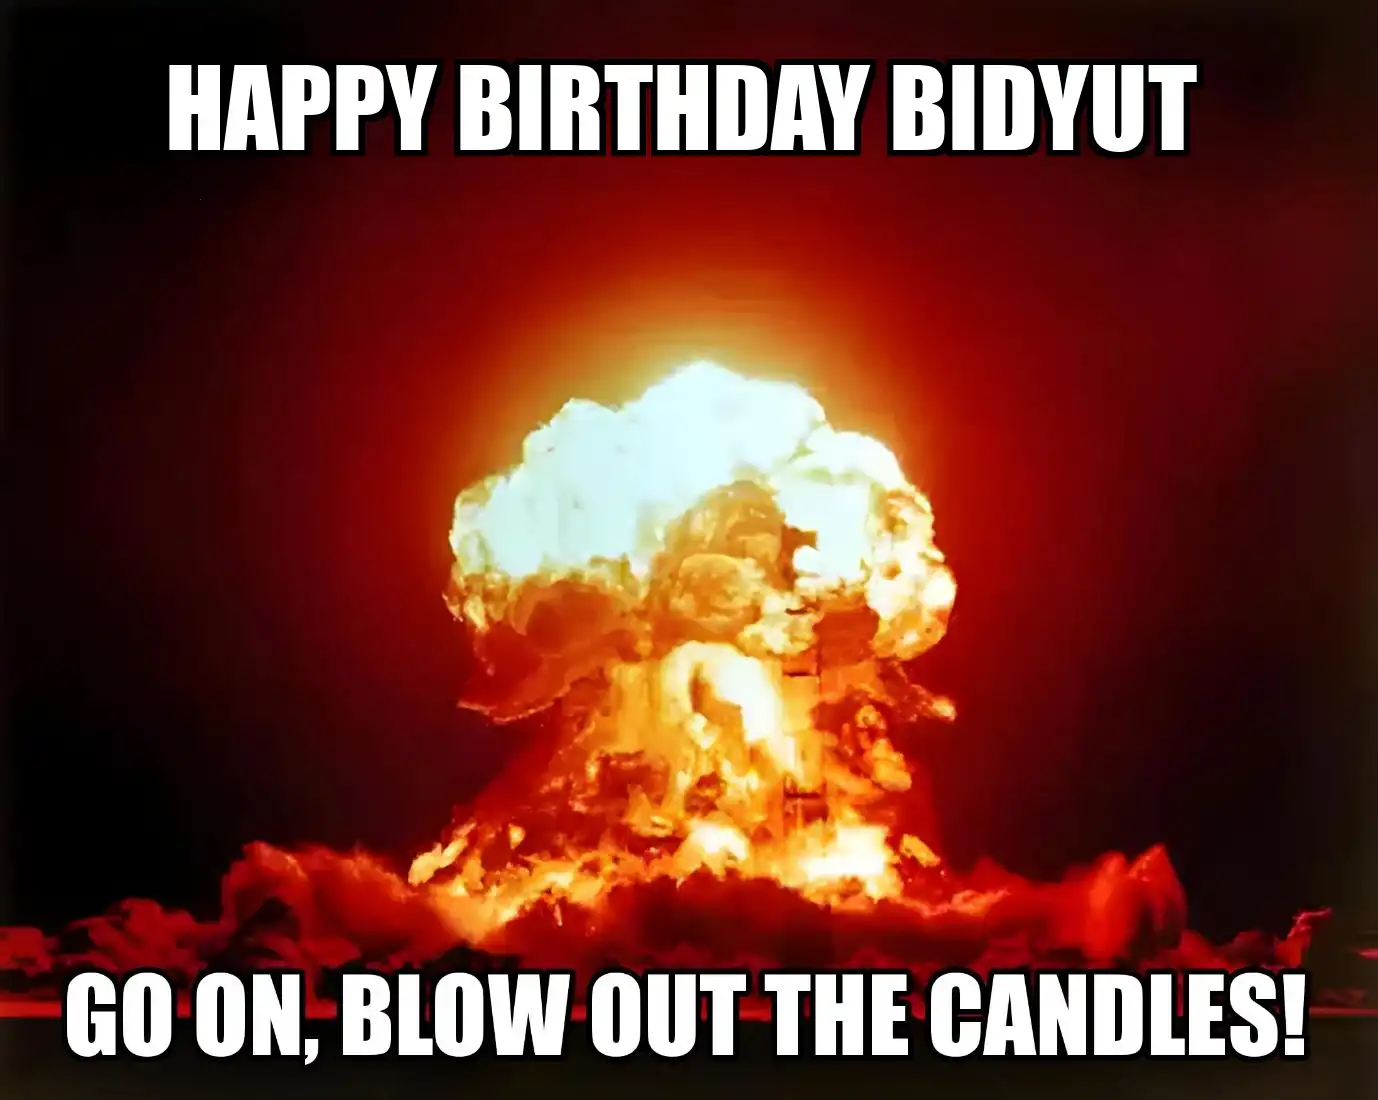 Happy Birthday Bidyut Go On Blow Out The Candles Meme